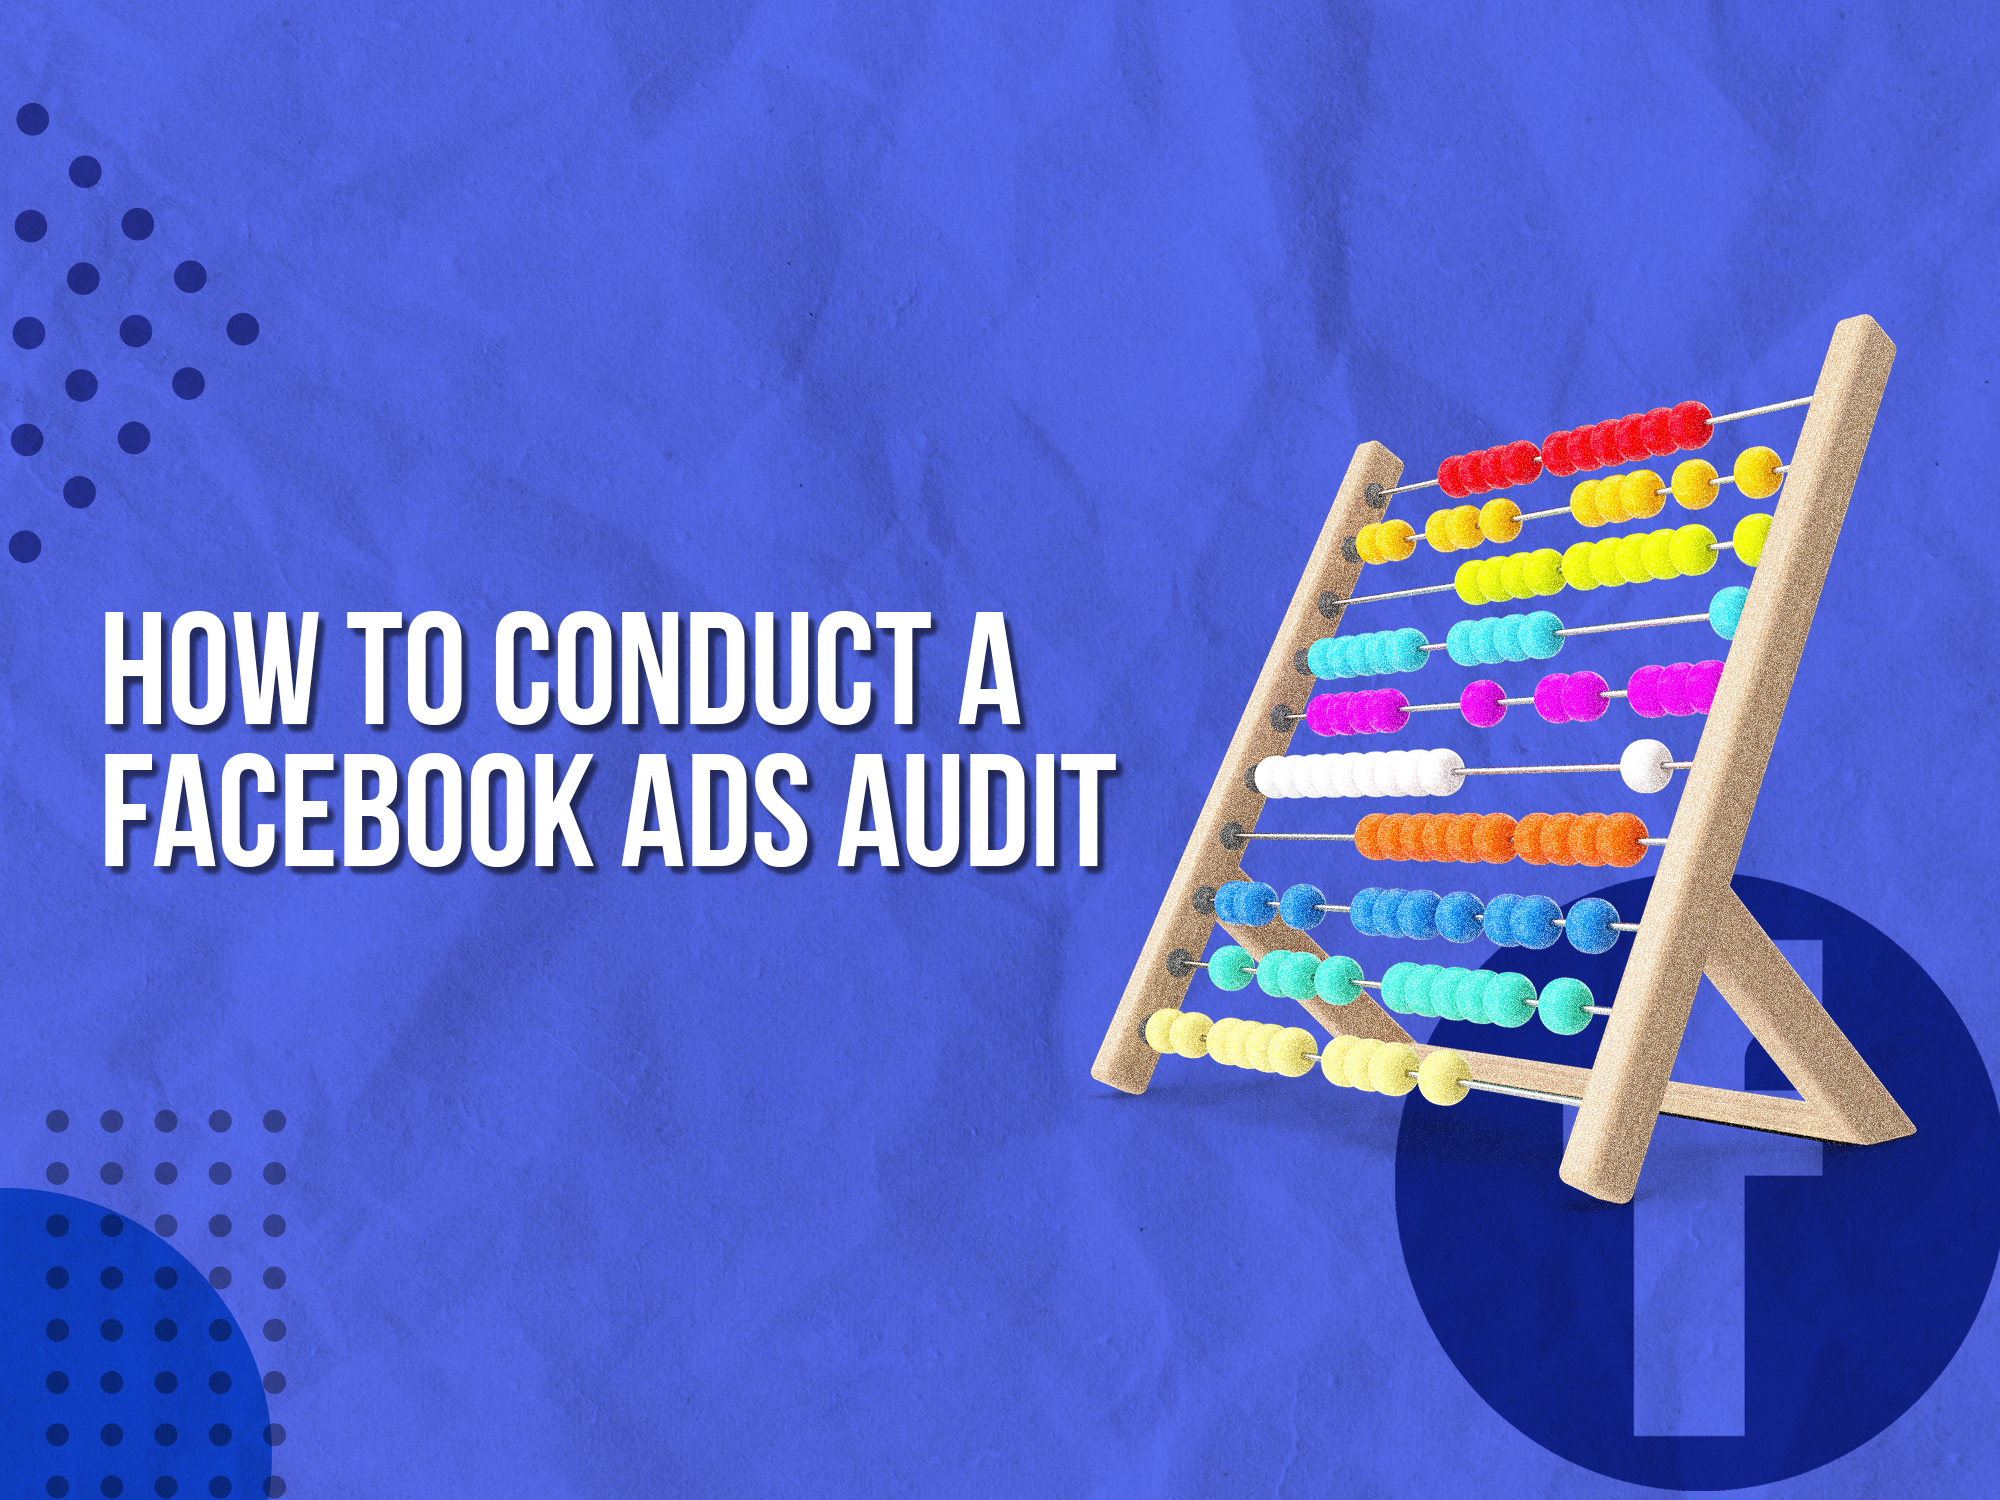 How To Conduct A Facebook Ads Audit - Your Comprehensive Guide